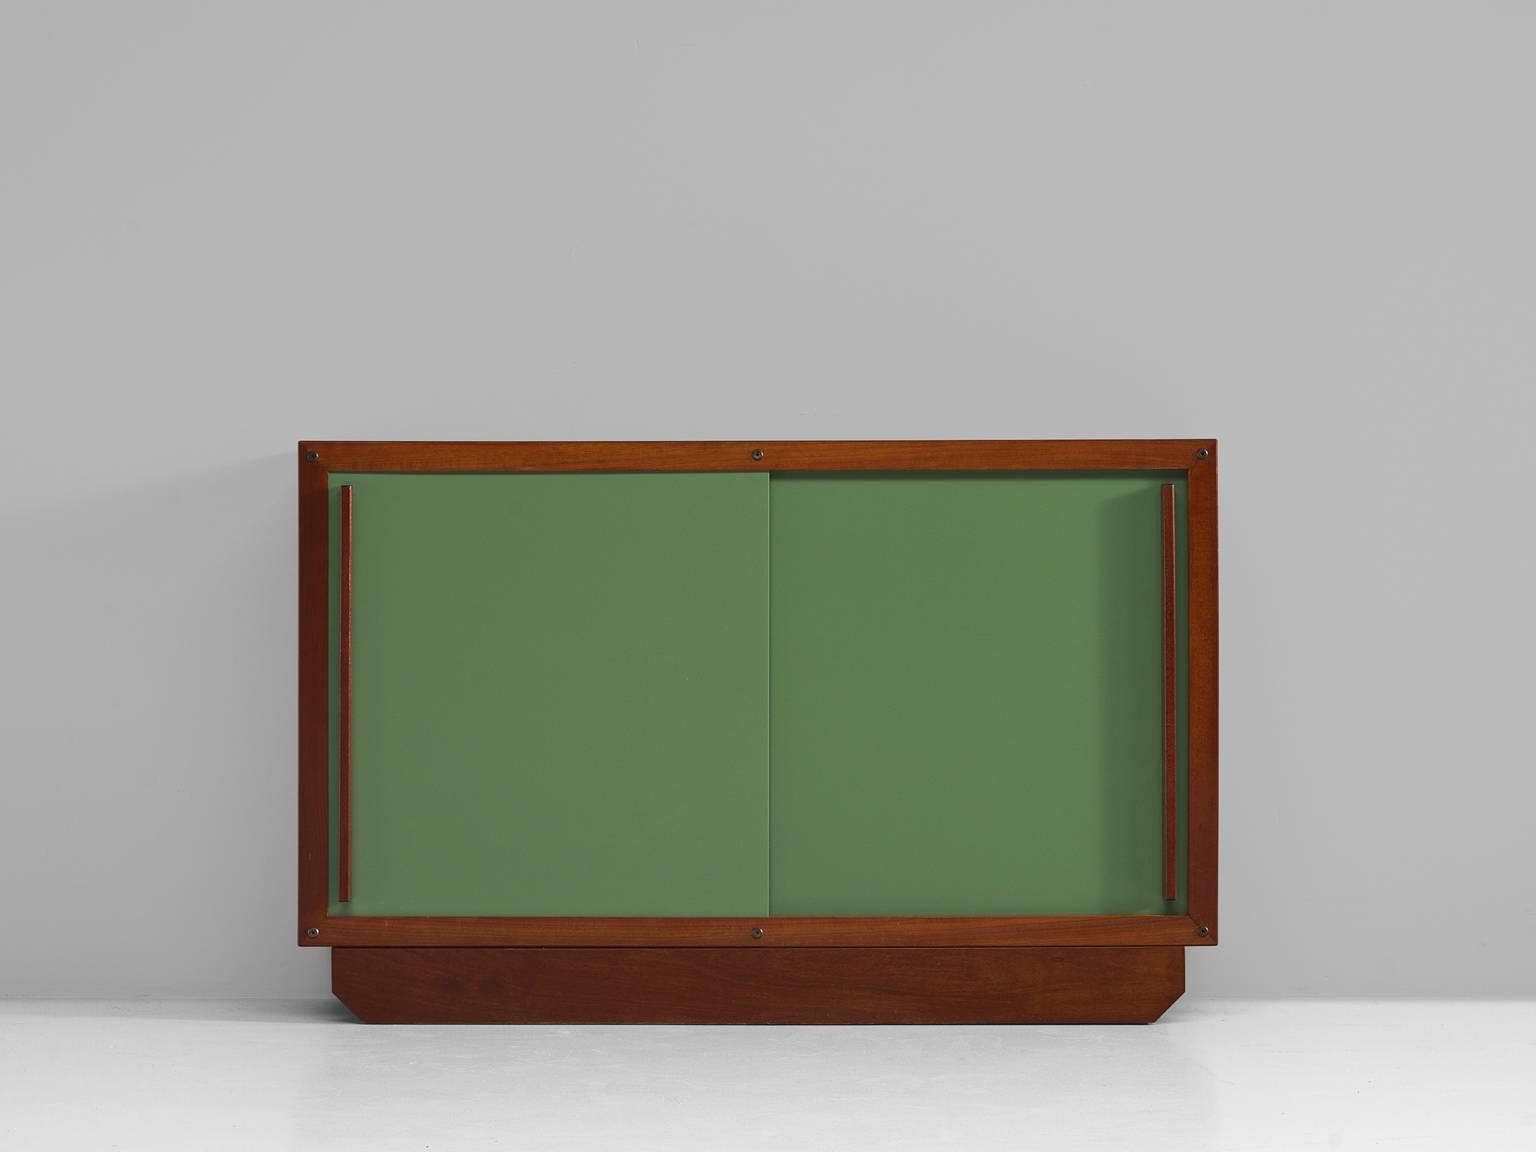 Cabinet with two sliding doors, plywood and teak, France, 1950s.

Small cabinet with two doors that slide open. The design forms a playful and versatile piece of furniture resting on a sled base. Very simple clean design that is highly original.